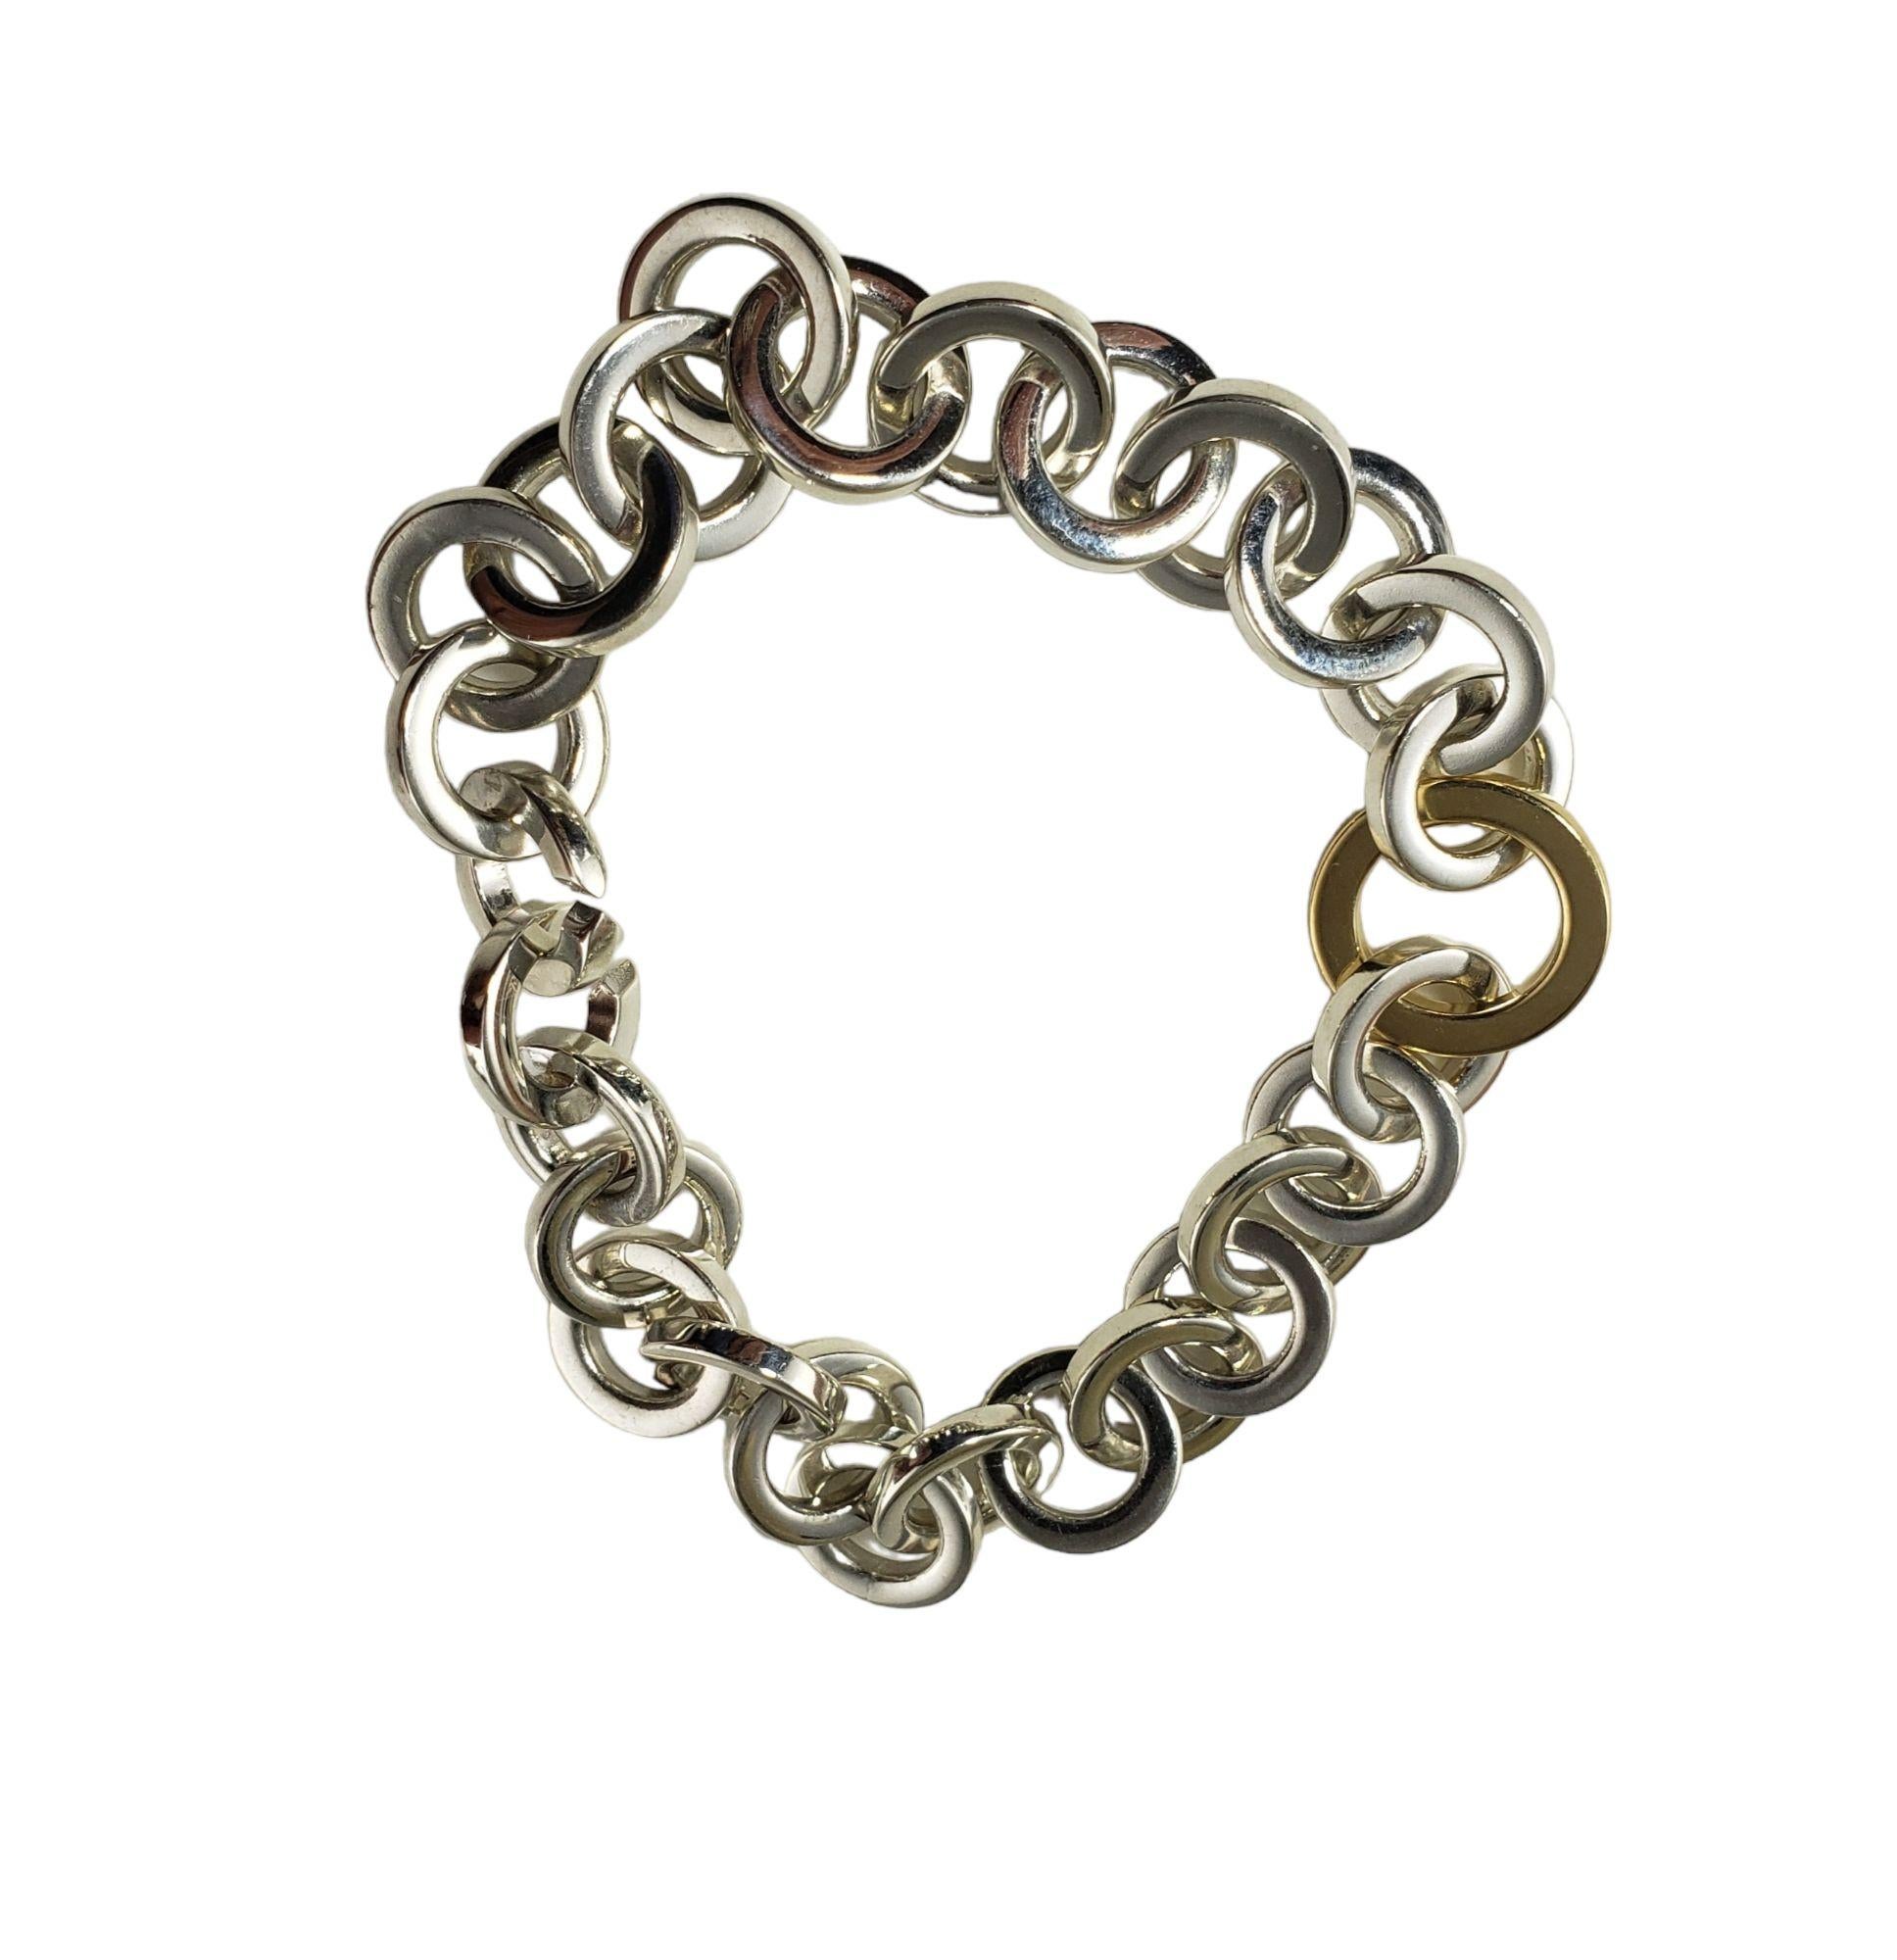 Vintage Tiffany & Co. Sterling Silver and 18 Karat Yellow Gold Open Circle Link Bracelet-

This lovely link bracelet by Tiffany & Co. is crafted in beautifully detailed sterling silver and 18K yellow gold. Width: 15 mm.

* Matching necklace: